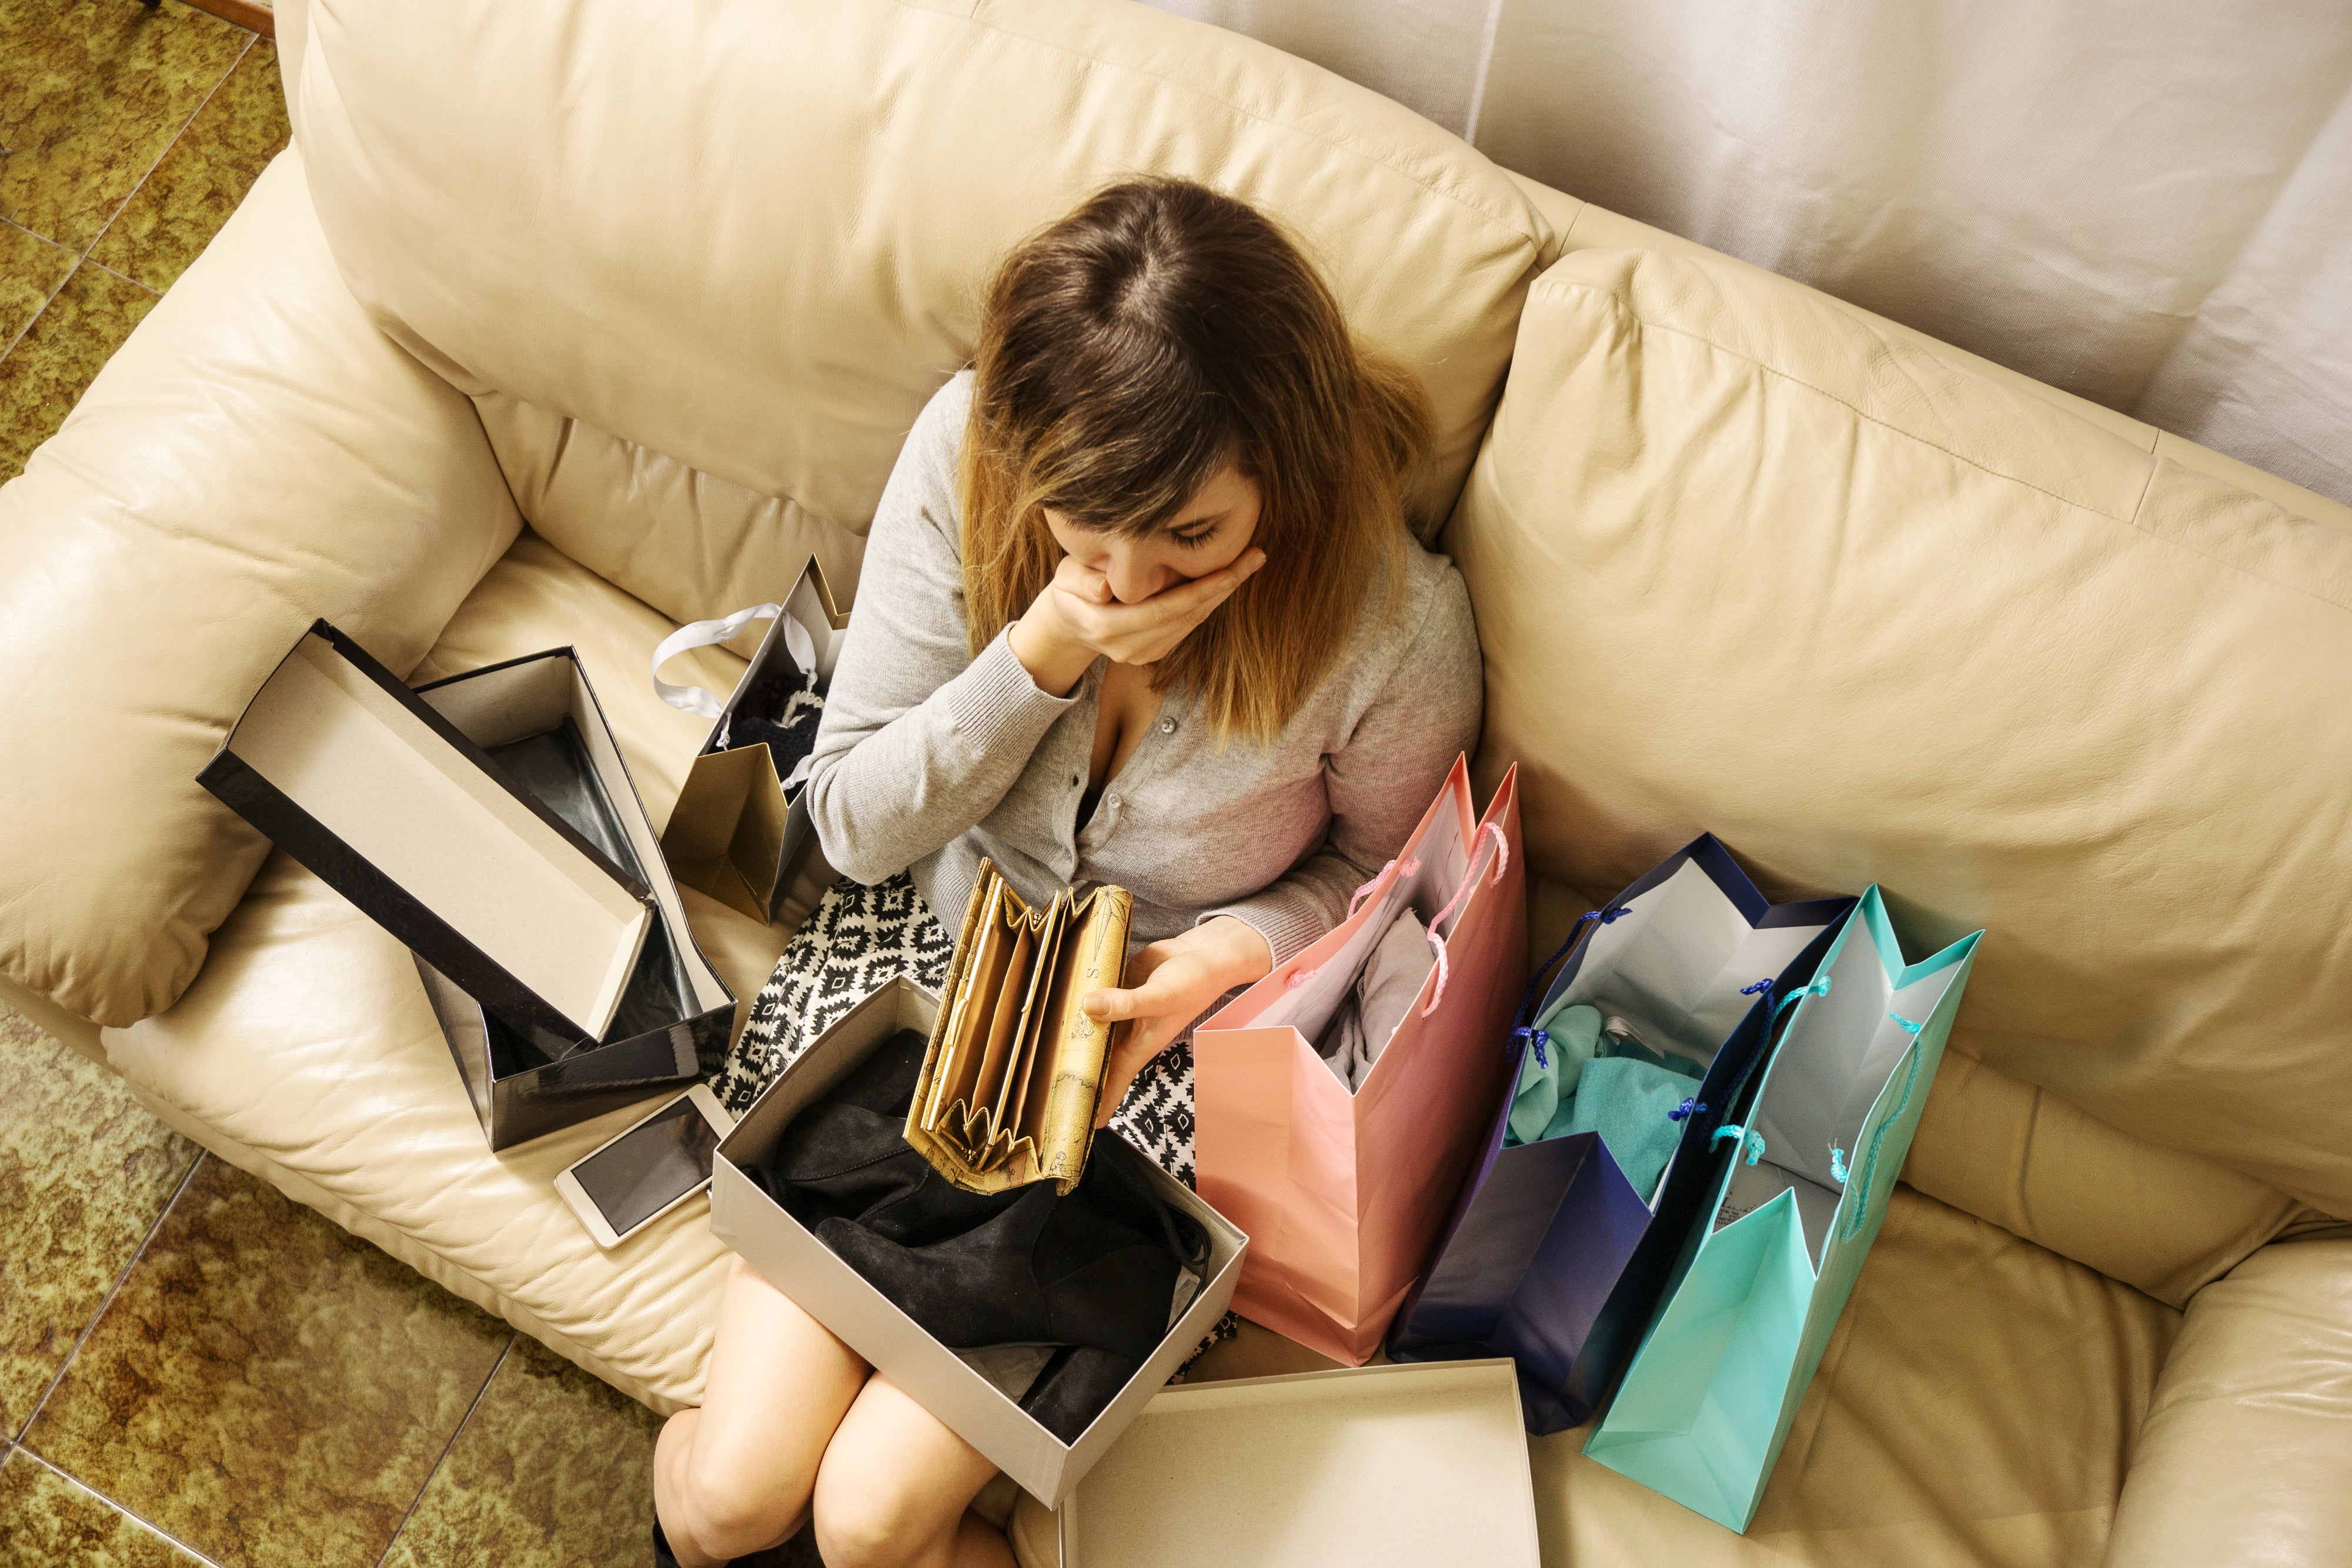 Shopping Addiction, Shopping Addiction therapy, shopping addiction on line counselling